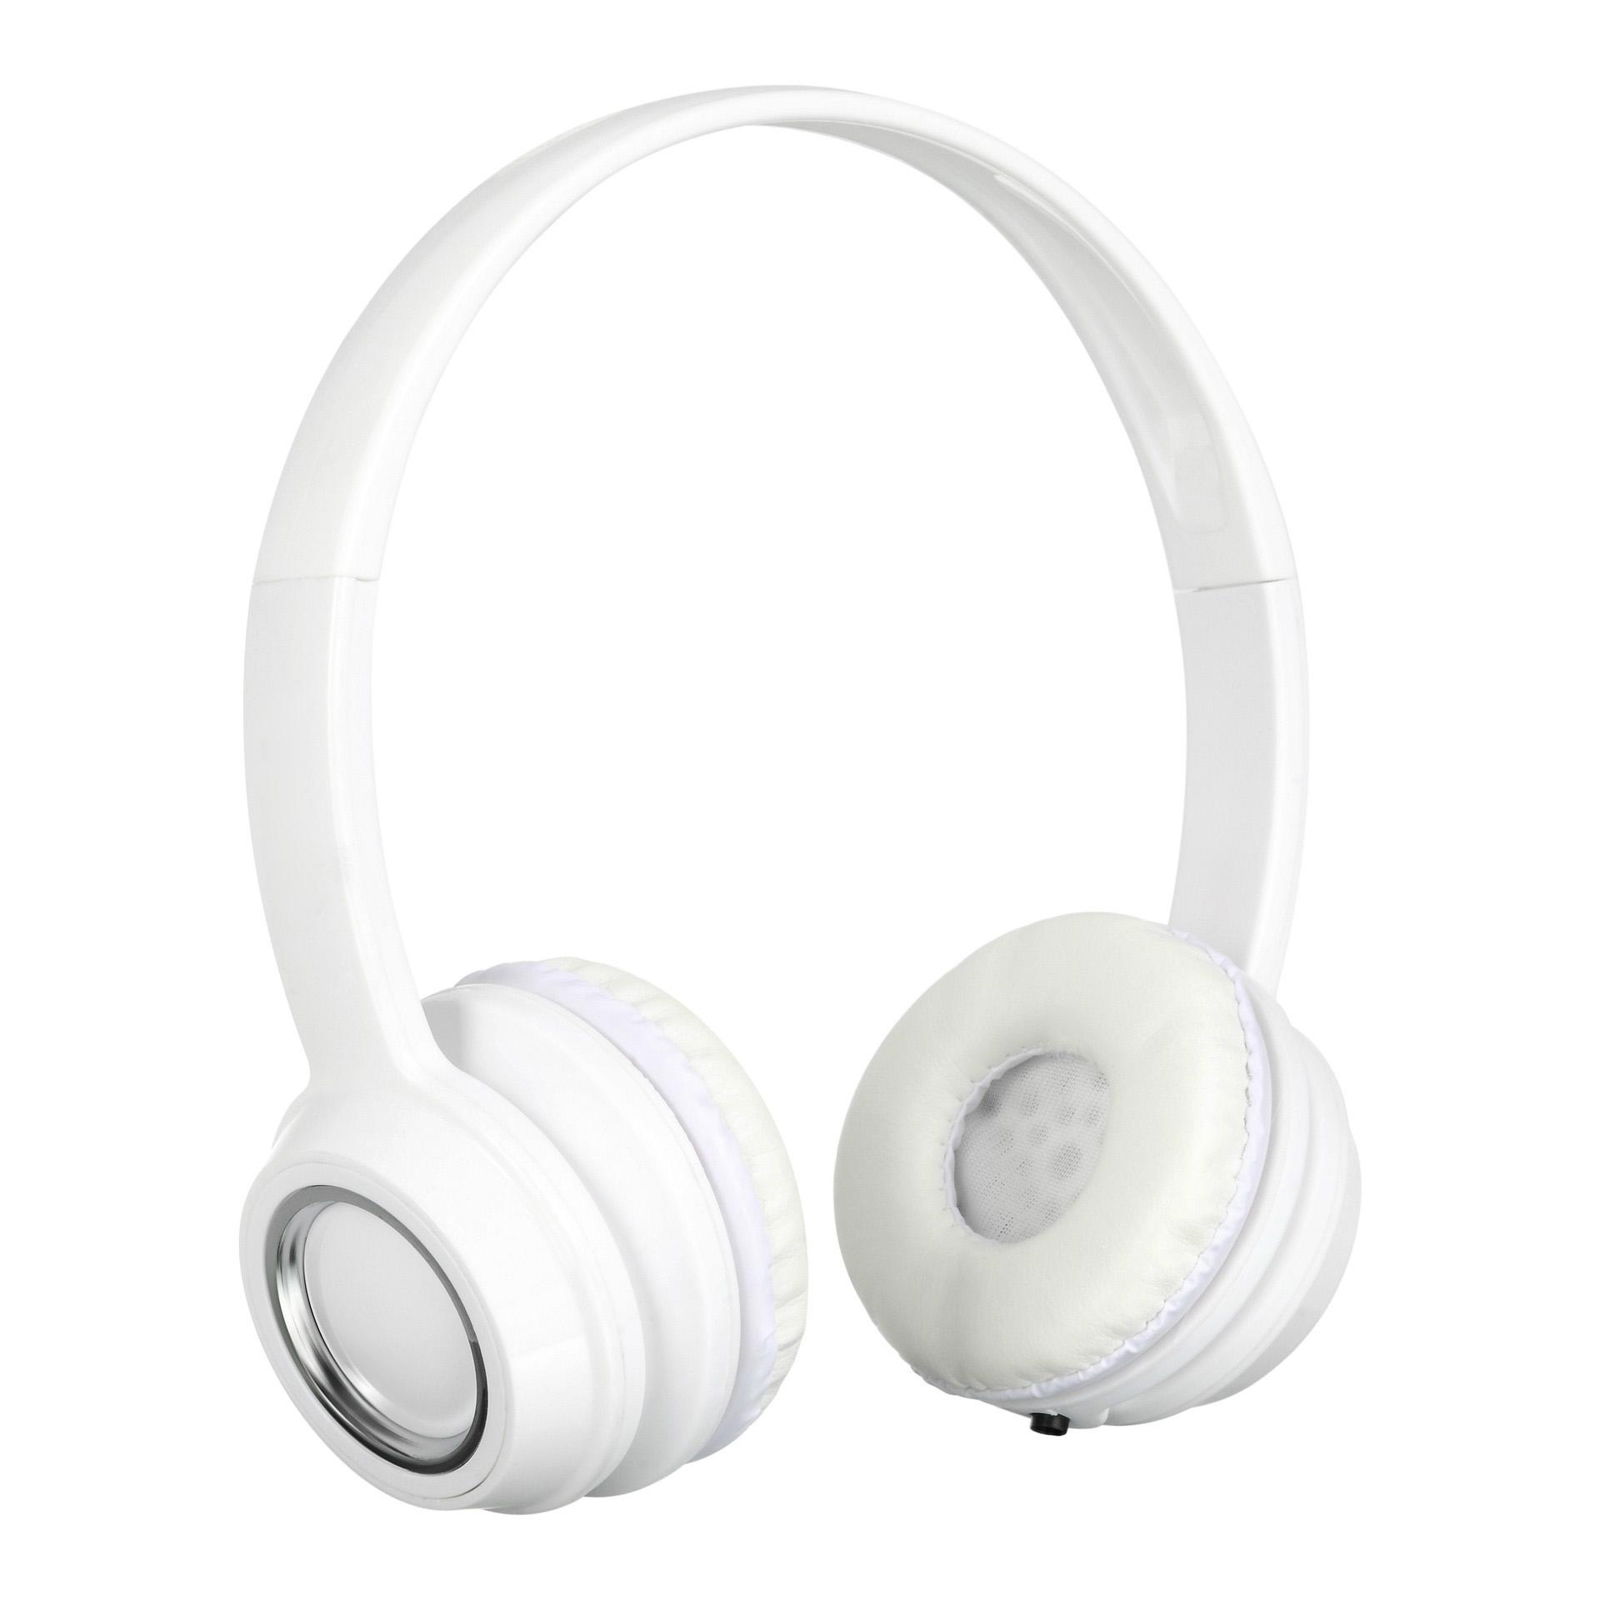 Colorfull Foldable portable mobile headphones for promotion as gift 5